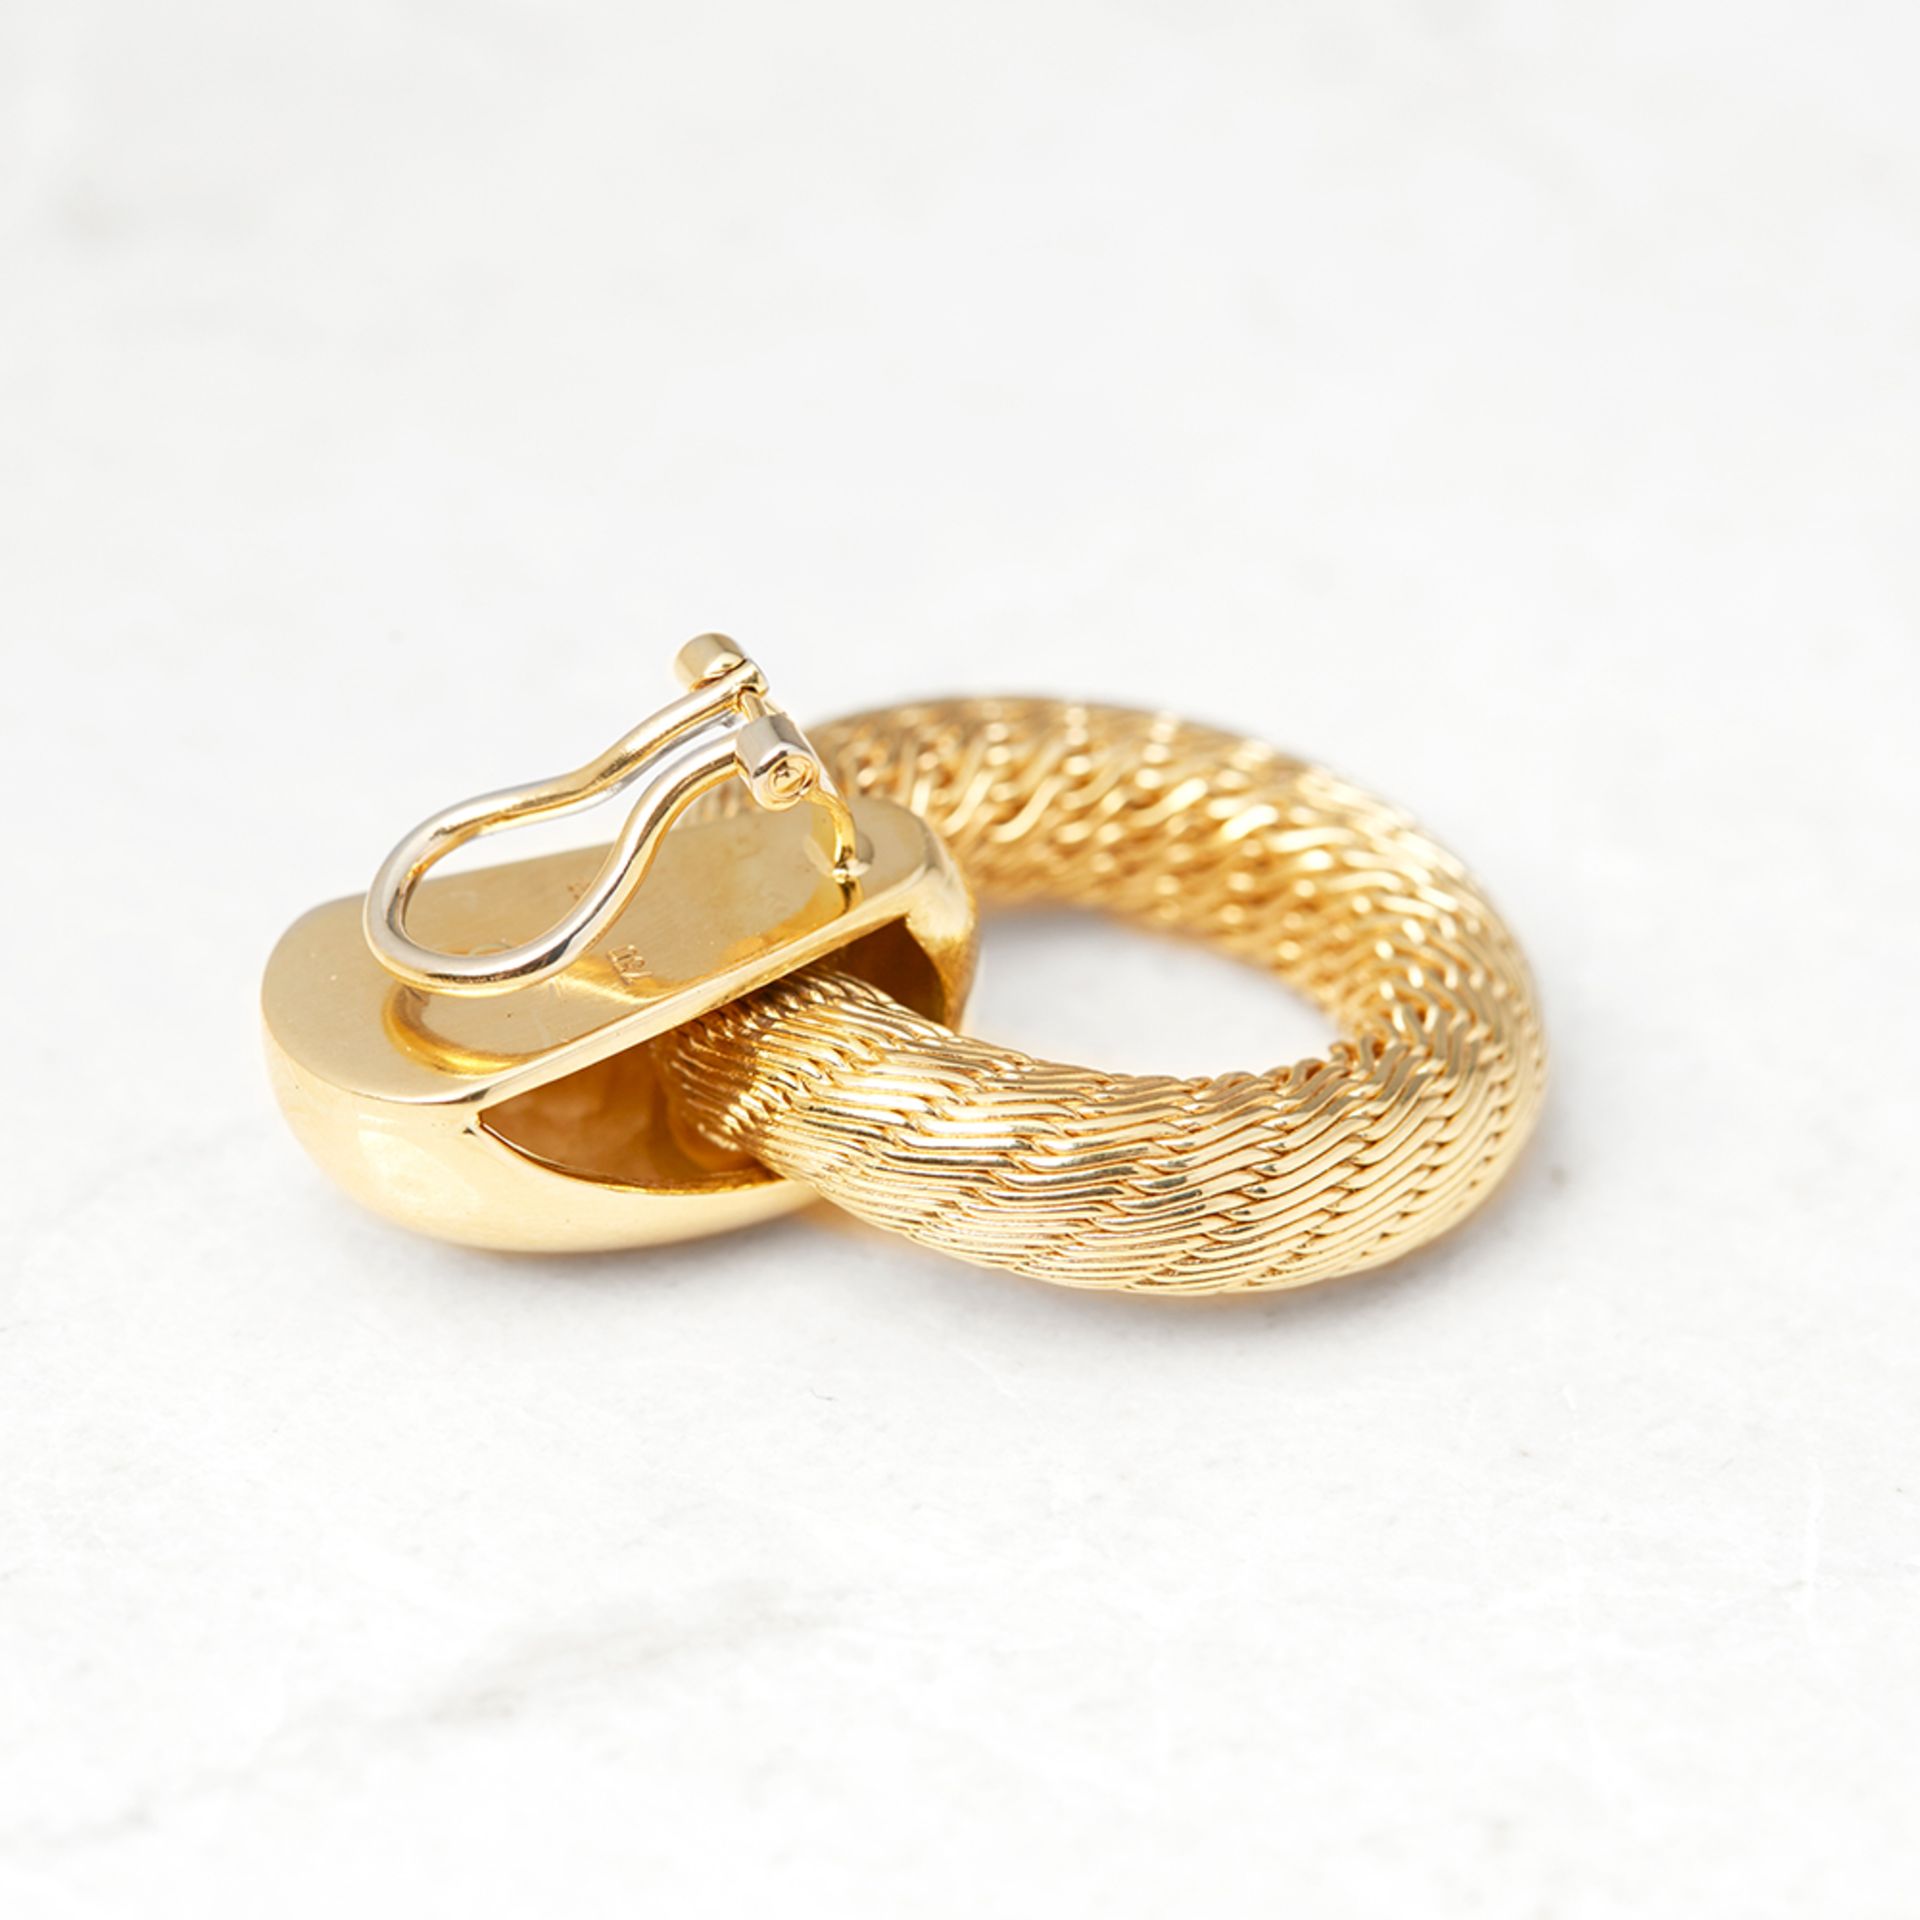 Tiffany & Co. 18k Yellow Gold Woven Hoop Ear Clips - Image 2 of 4